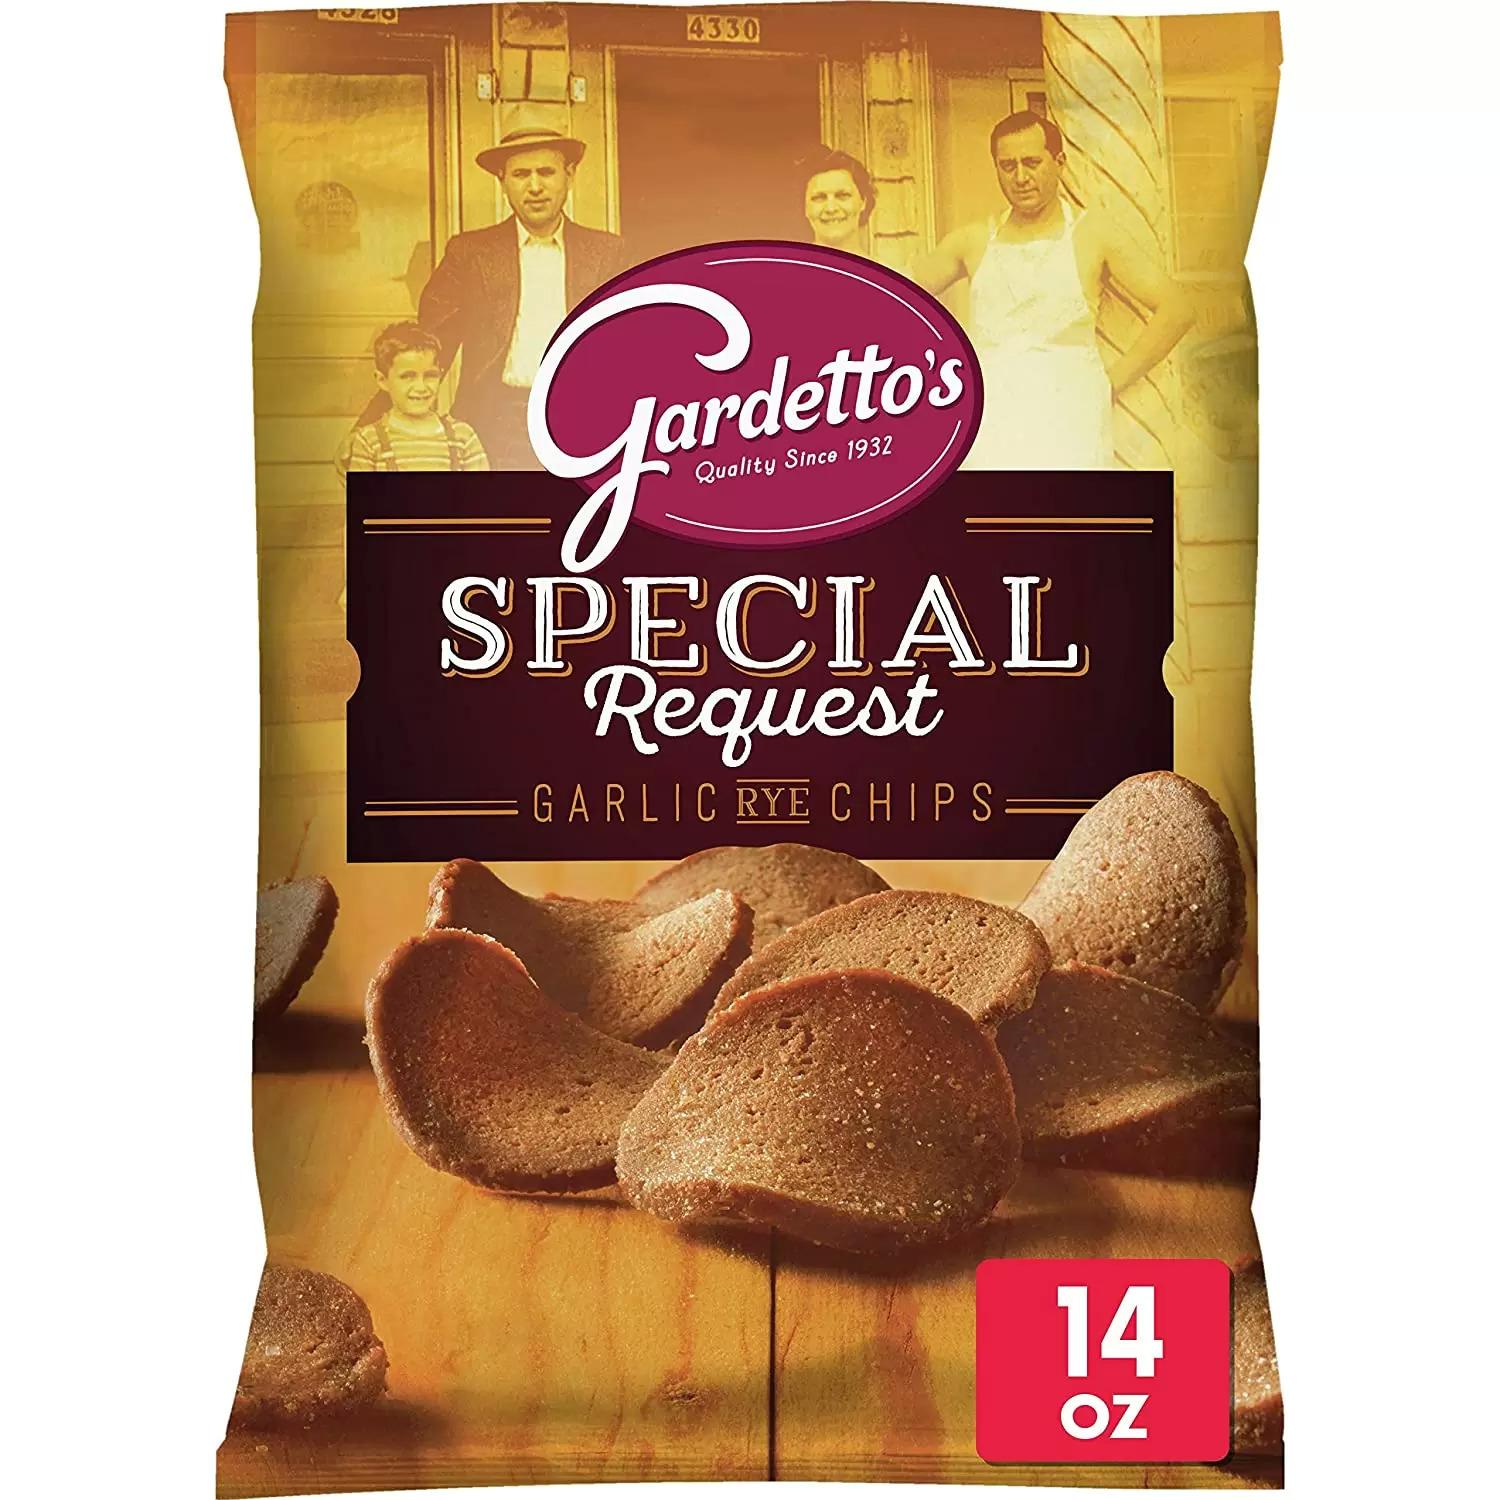 Gardettos Roasted Garlic Rye Chips Snack Mix for $2.83 Shipped